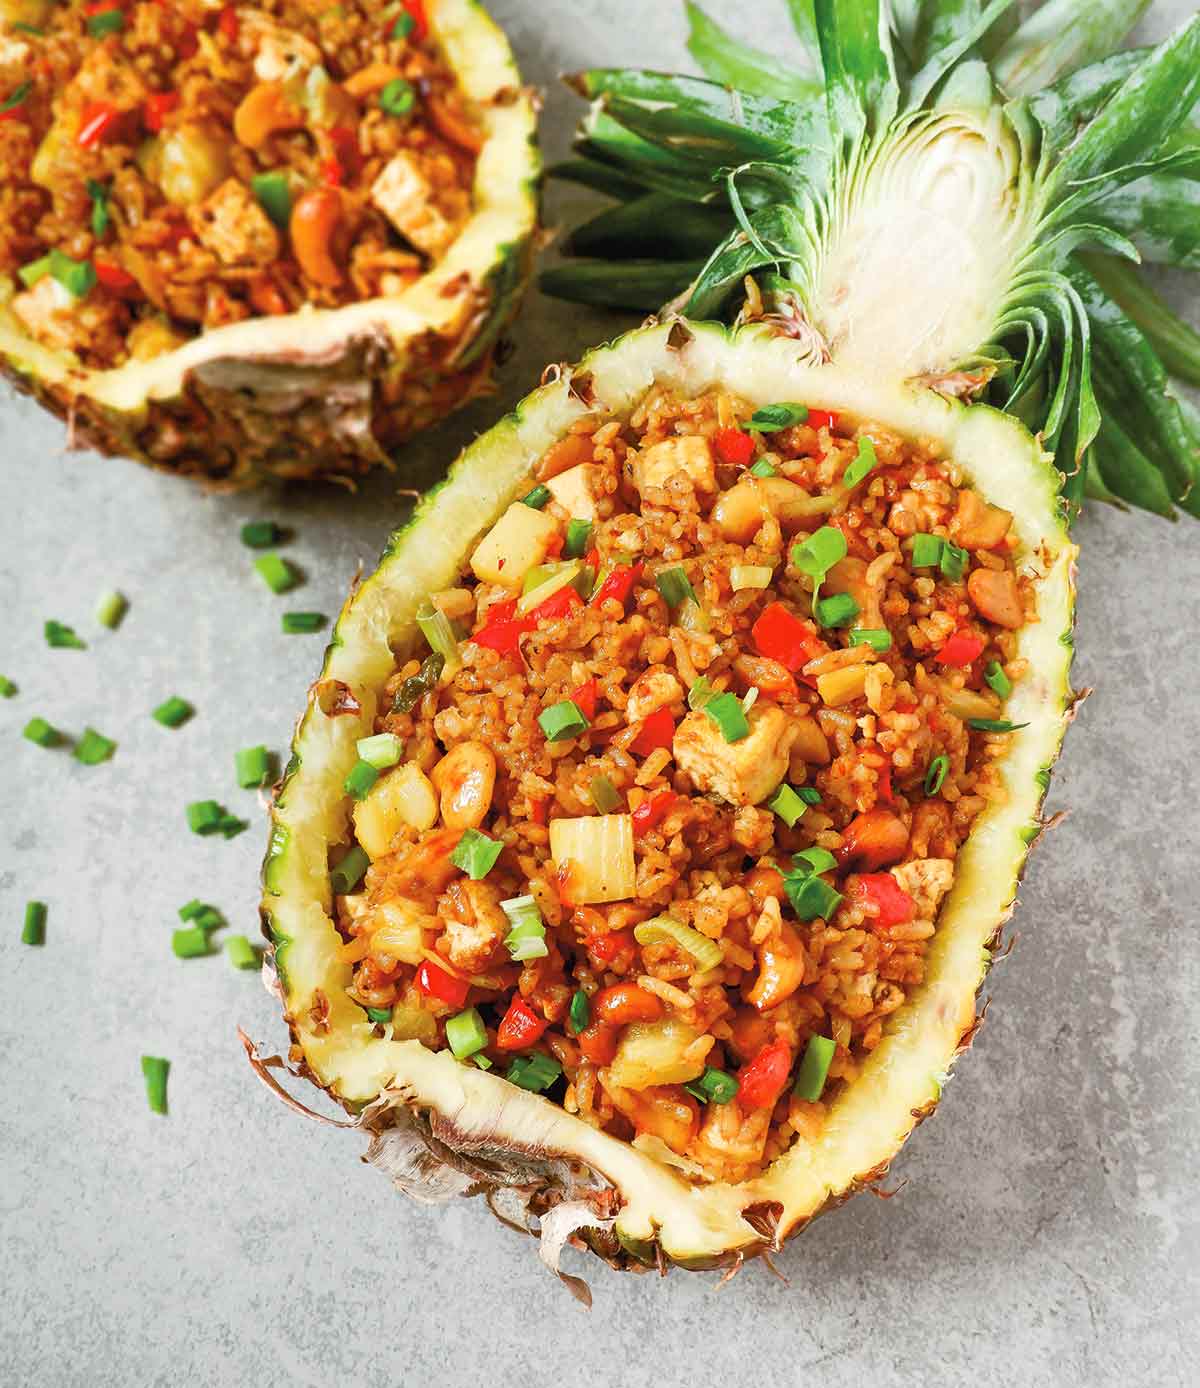 2 halves of a hollowed out pineapple filled with pineapple fried rice and garnished with green onions